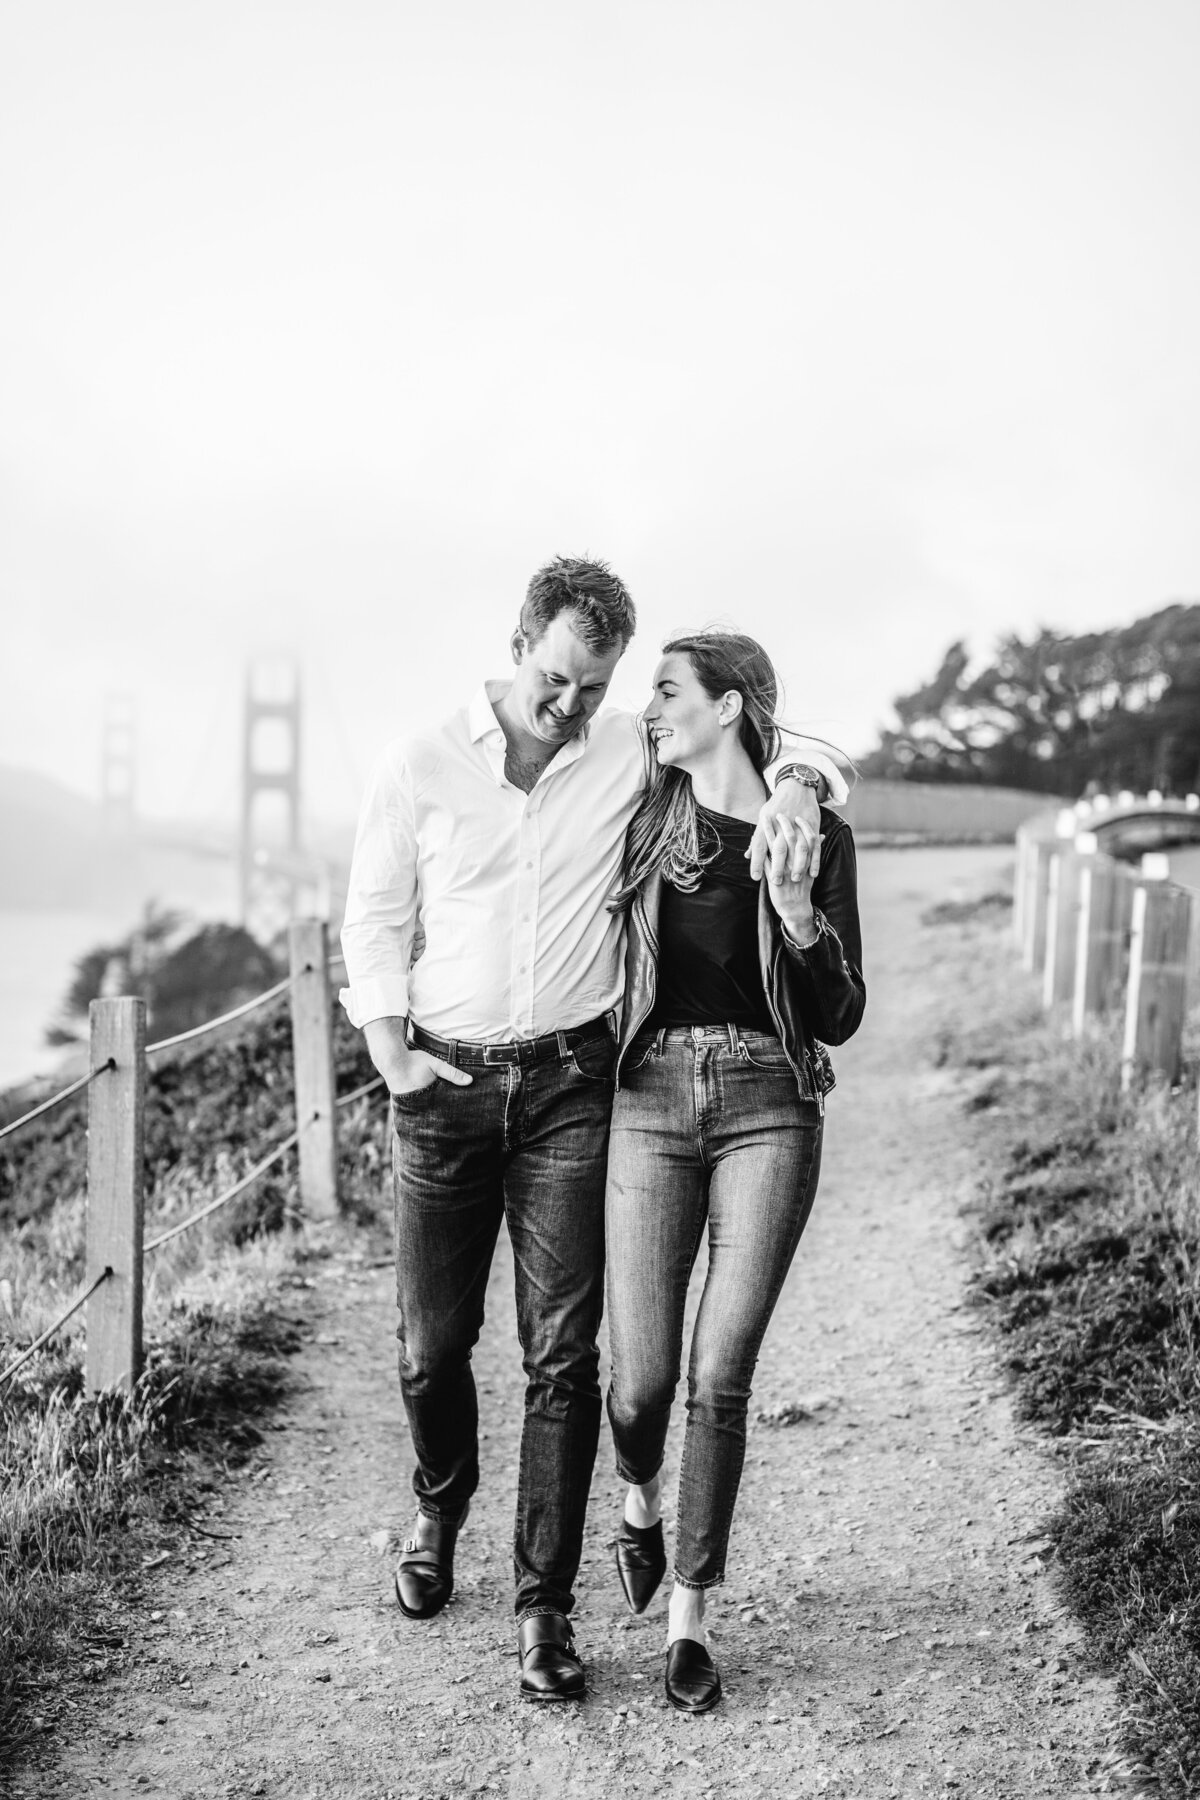 Best California and Texas Engagement Photographer-Jodee Debes Photography-279